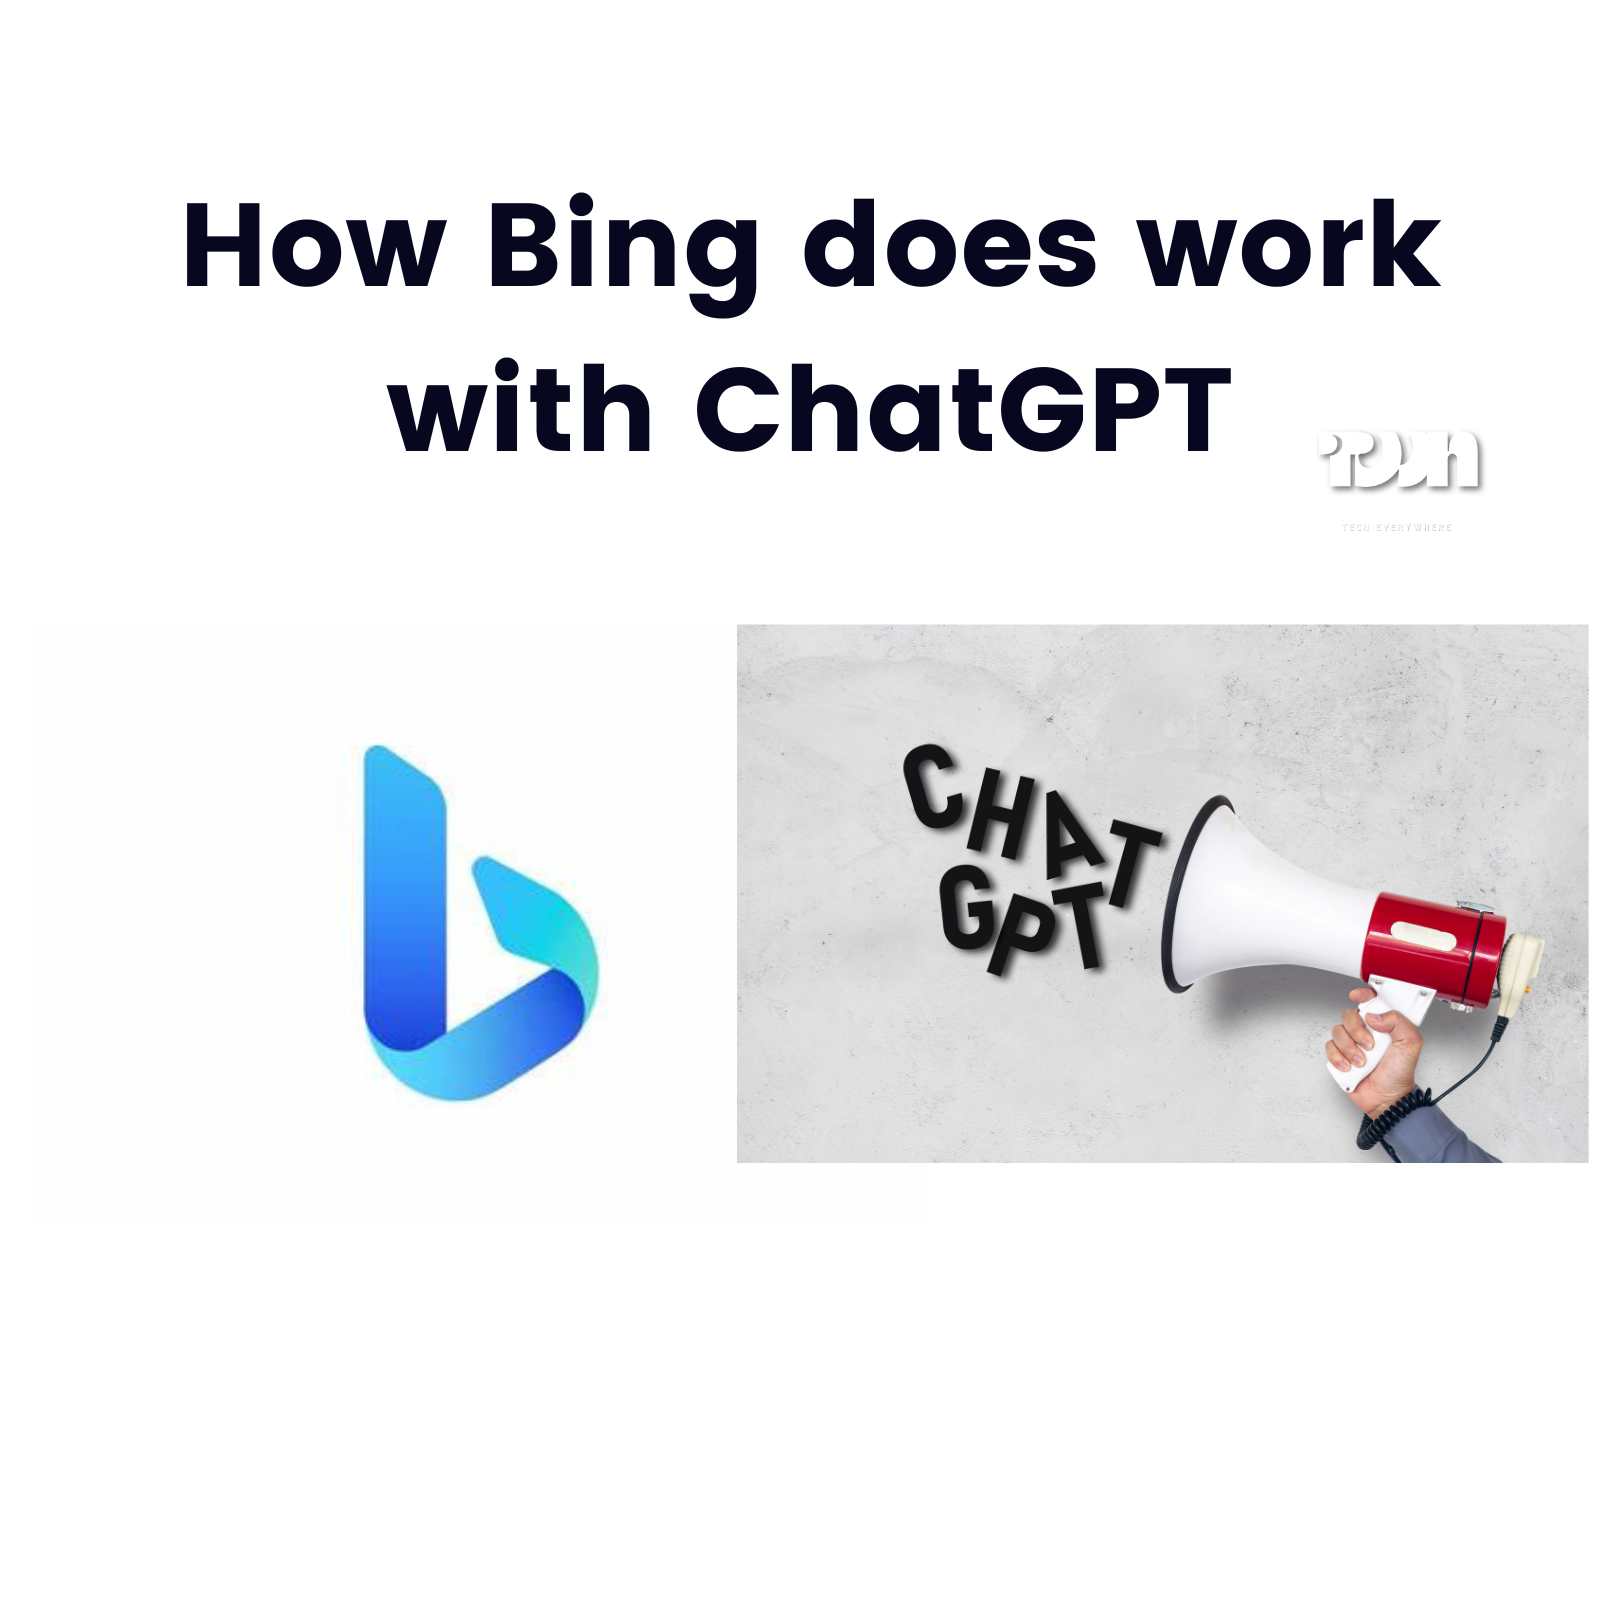 How Bing does work with ChatGPT and what benefit you can take